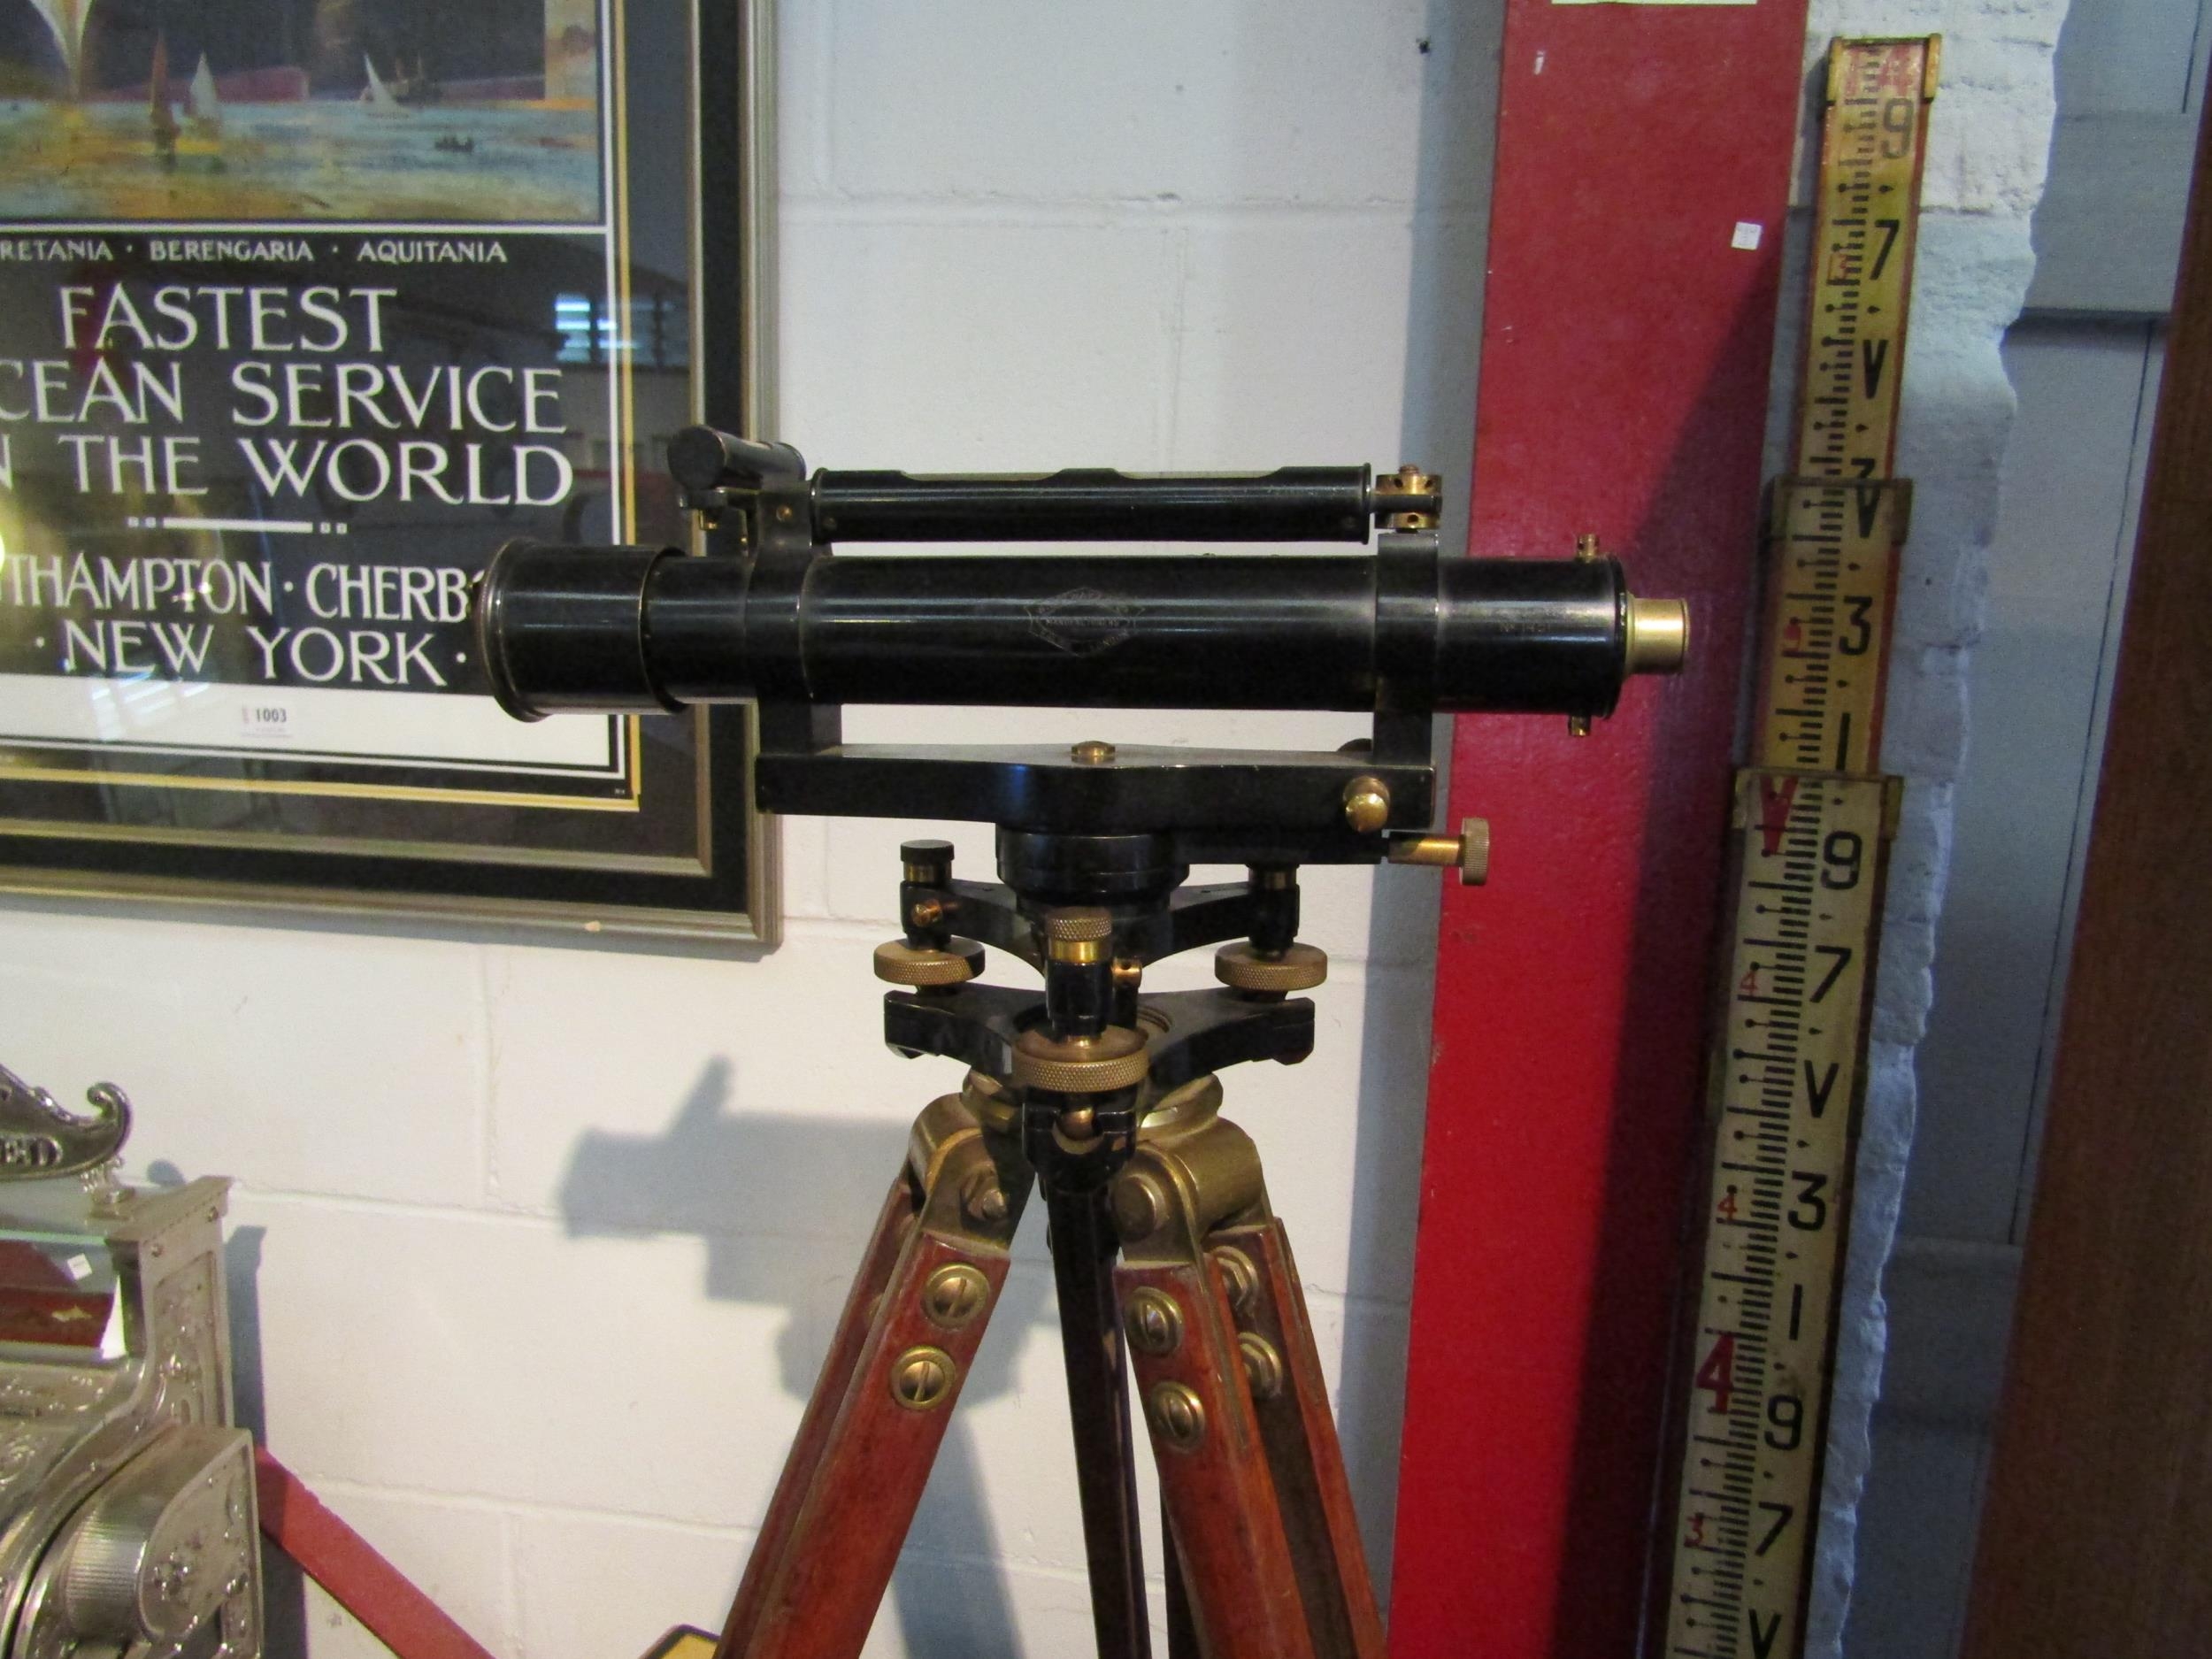 A W. Ottway & Co., Ealing, London theodolite with mahogany case, tripod and 14ft three section